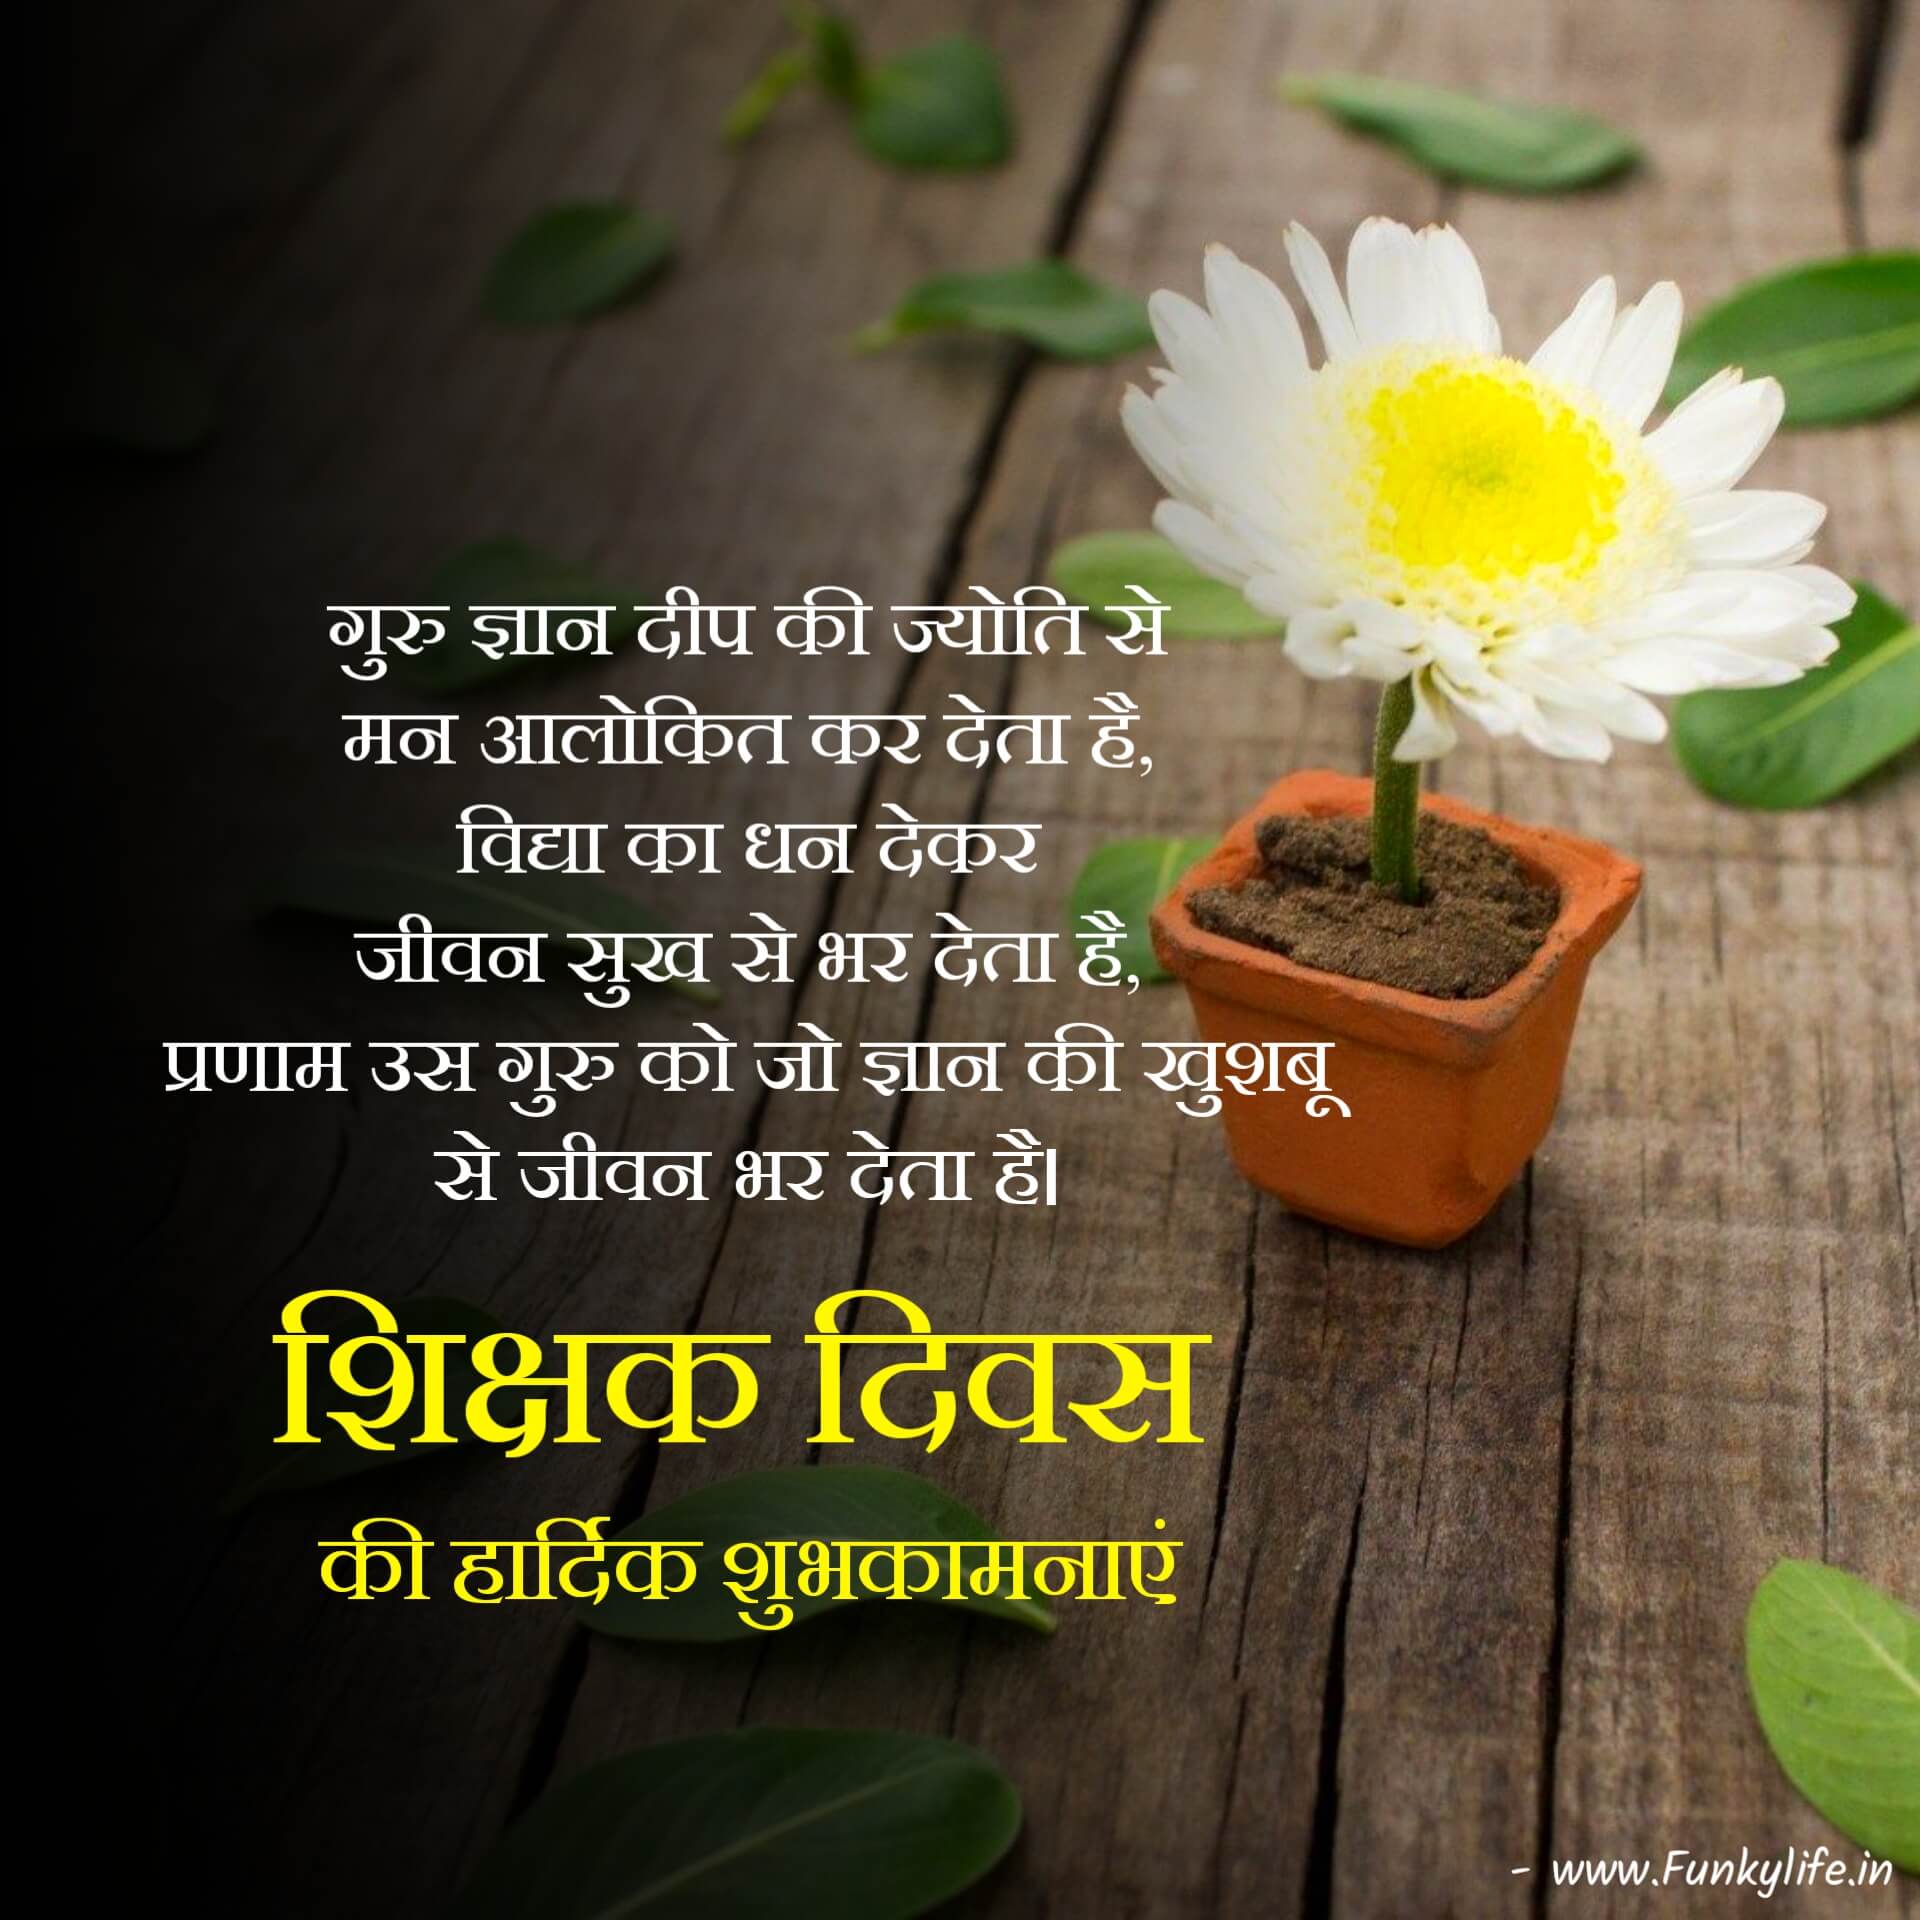 Teachers Day Wishes in Hindi Image